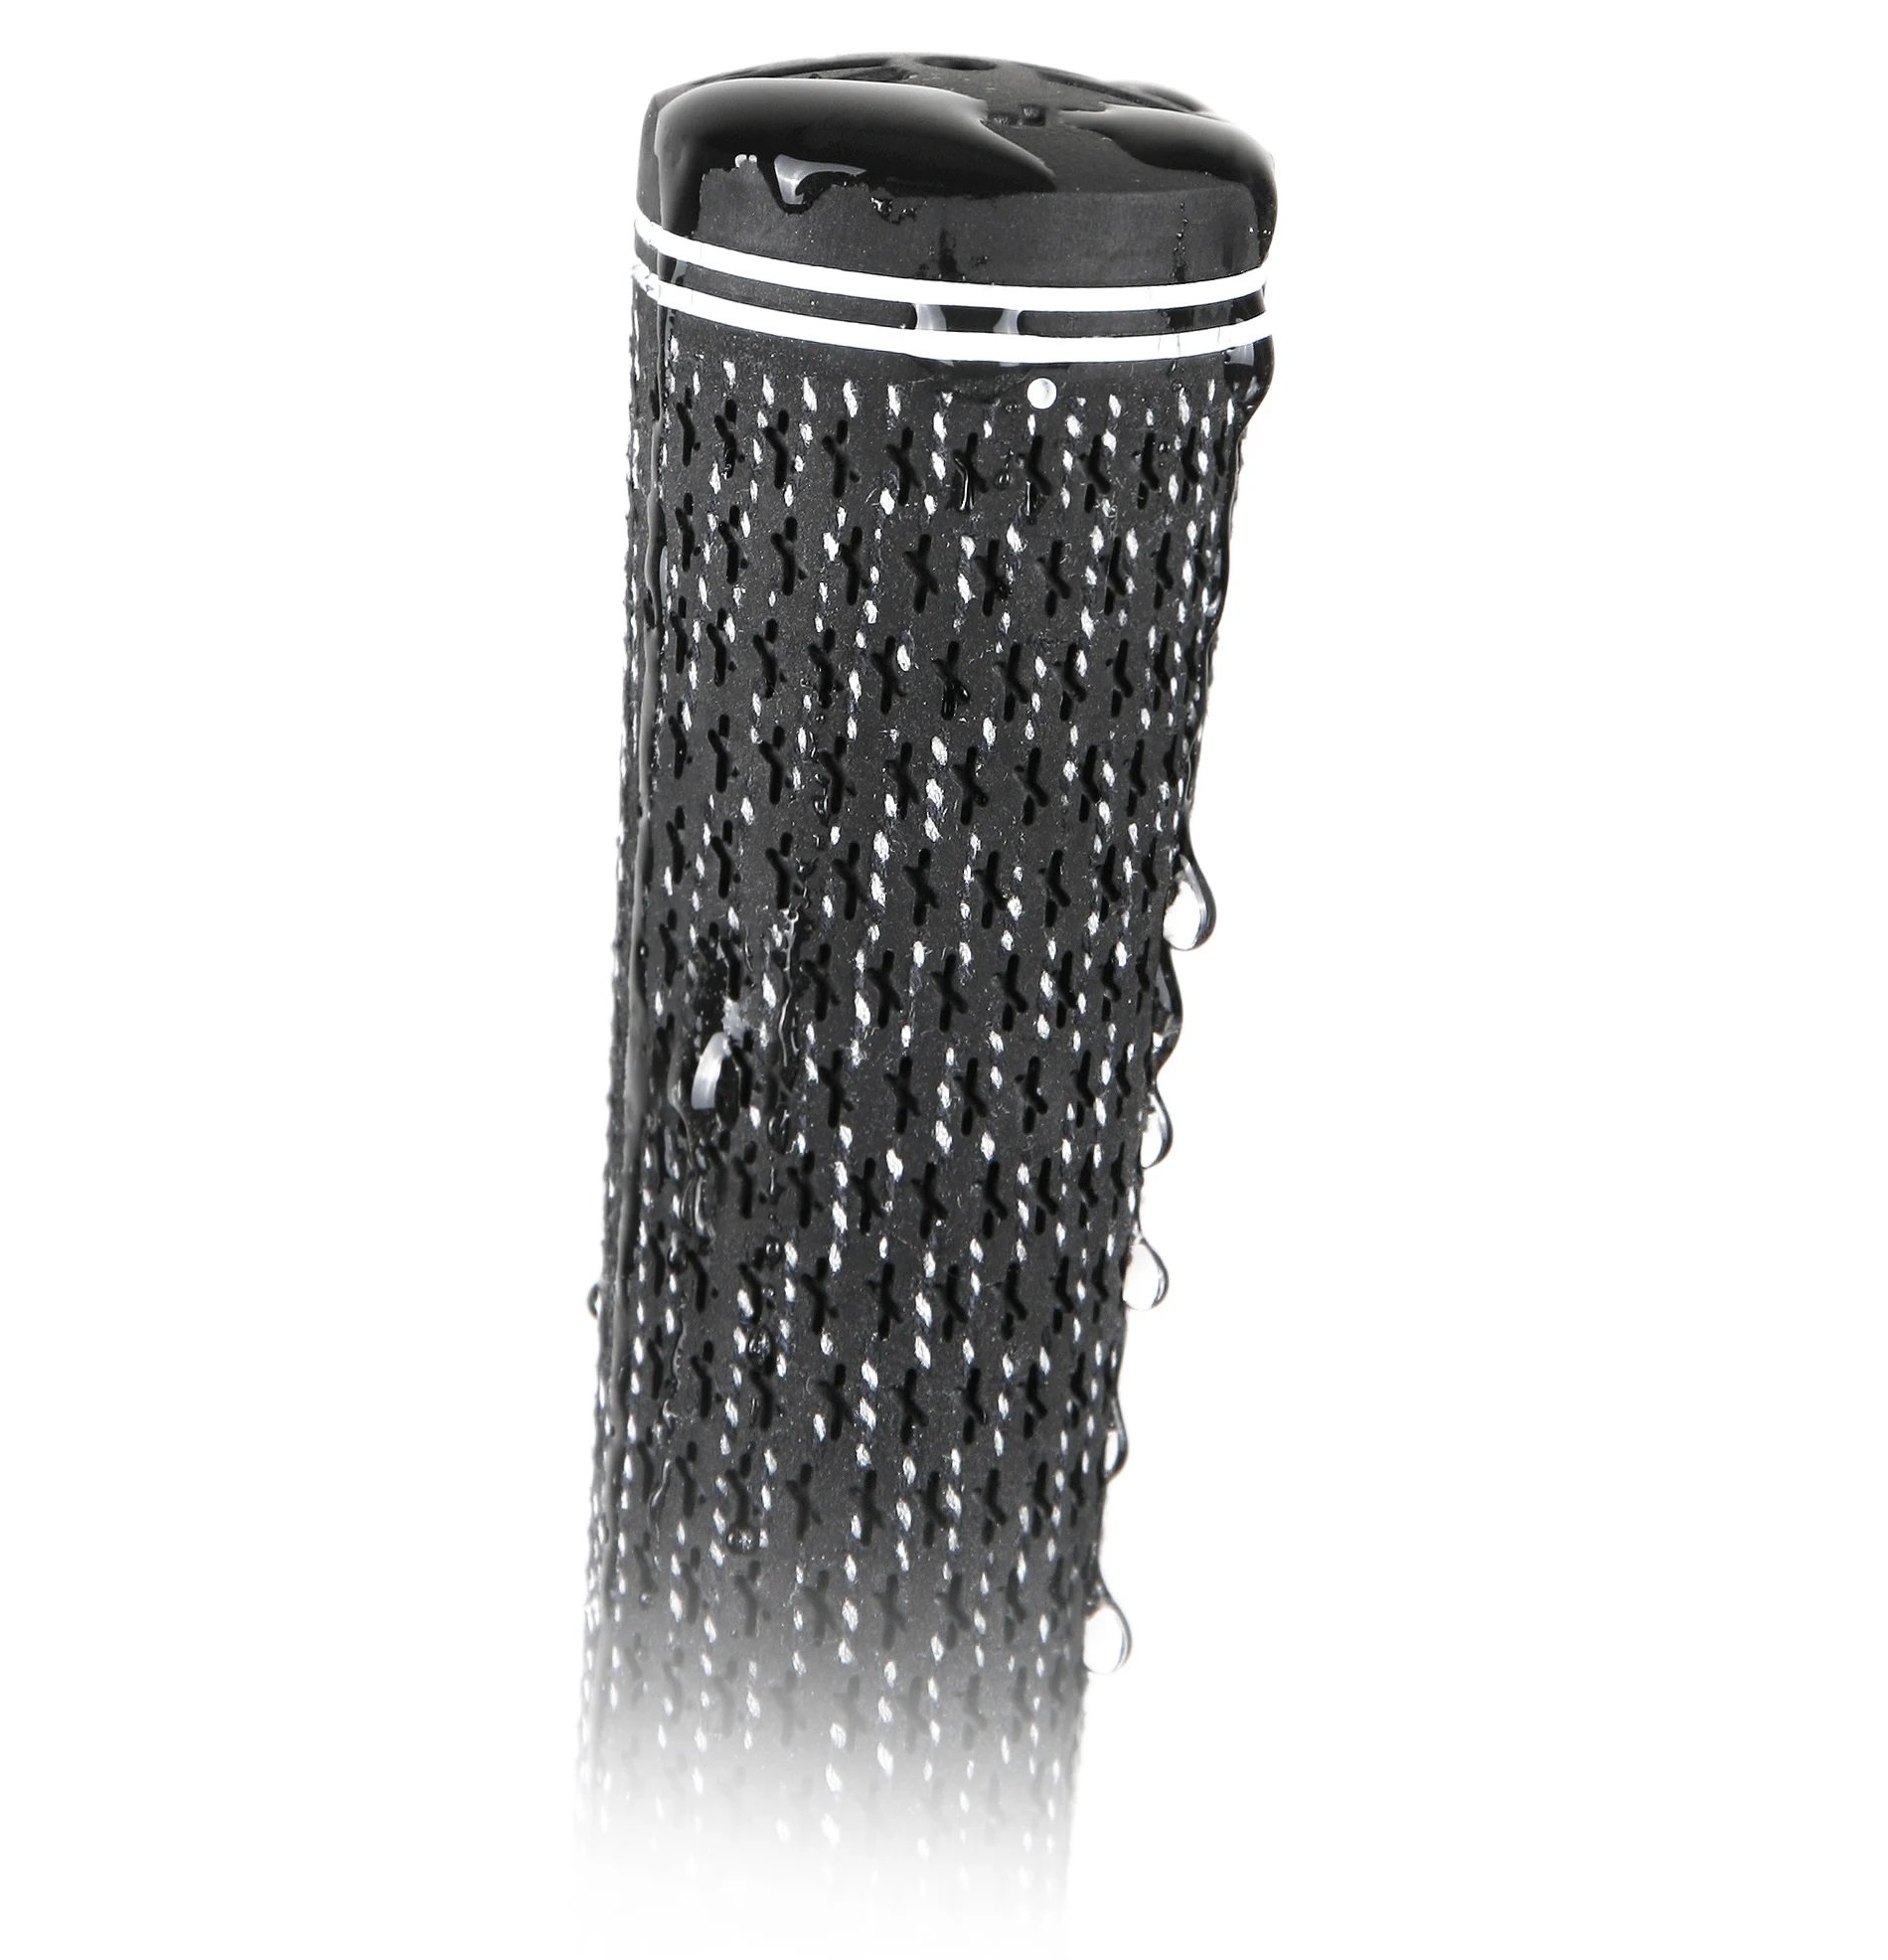 cord golf grip with water beading on it